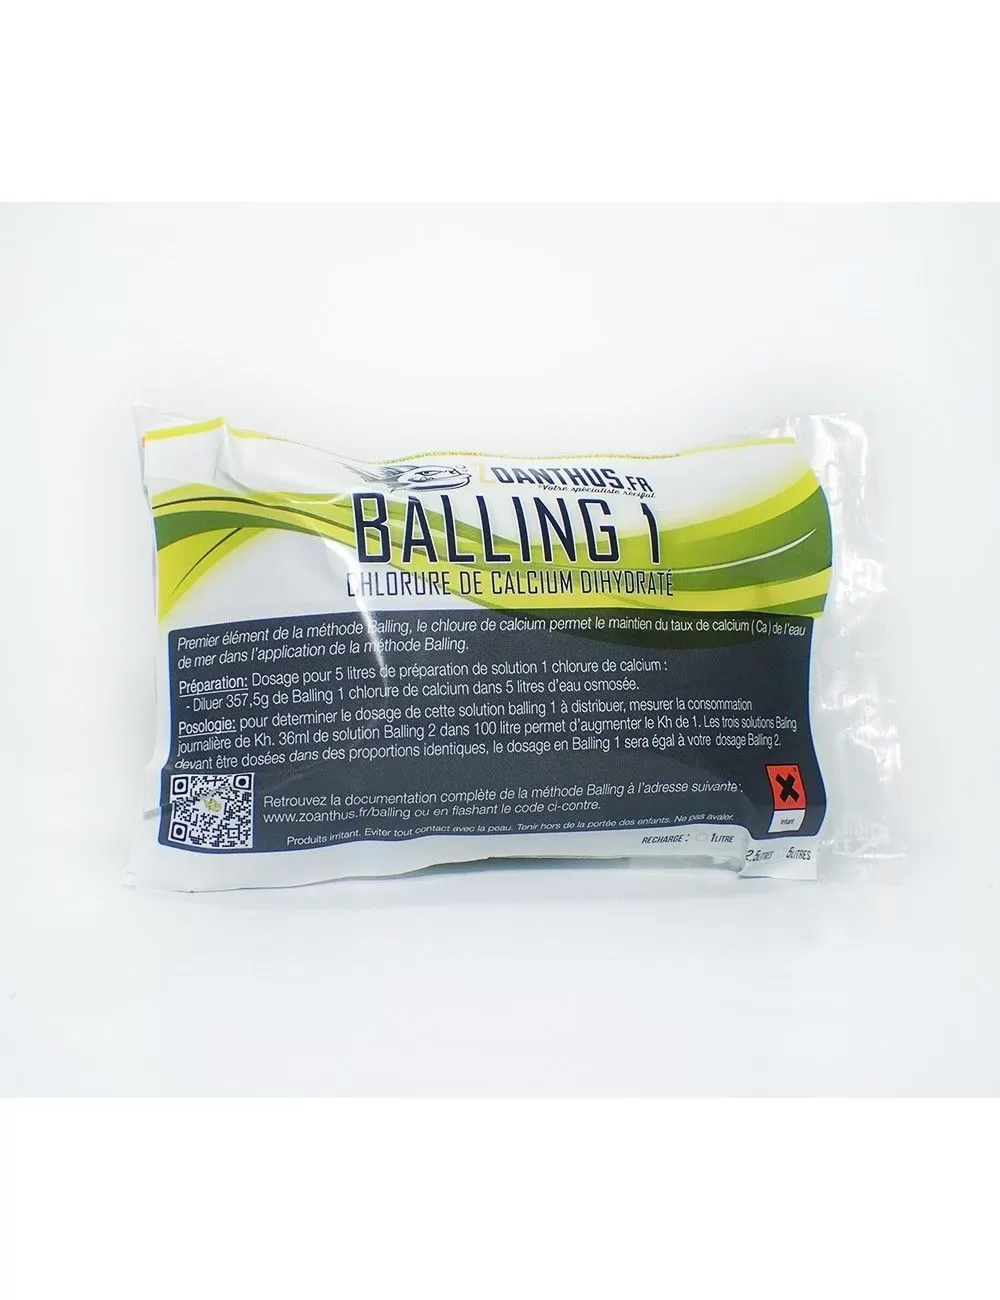 - ZOANTHUS.fr 1litre Balling 1 Calcium chloride dihydrate refill